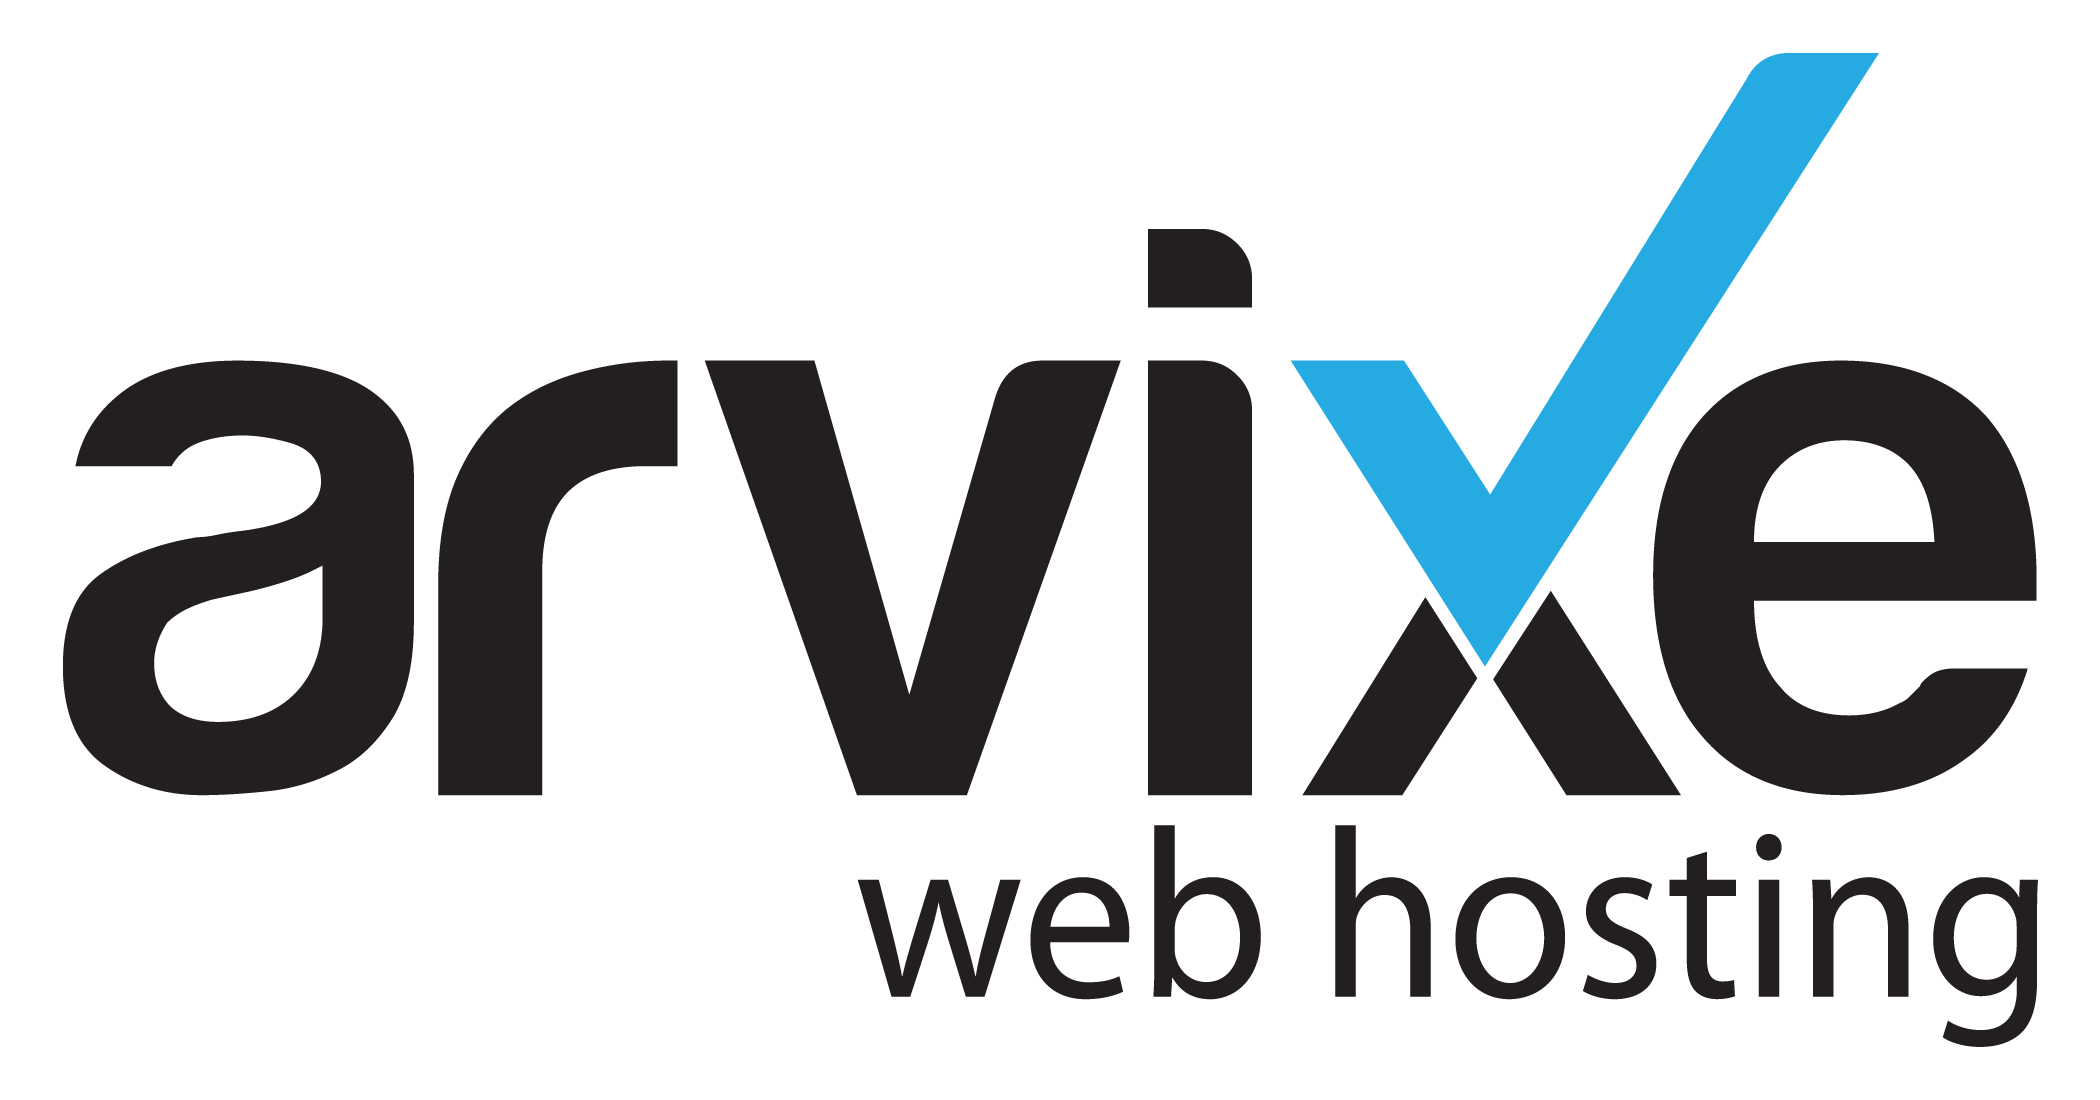 best web hosting 35 Best Web Hosting for Small Business in 2022 (Pros and Cons) arvixe logo 2100x1100 2